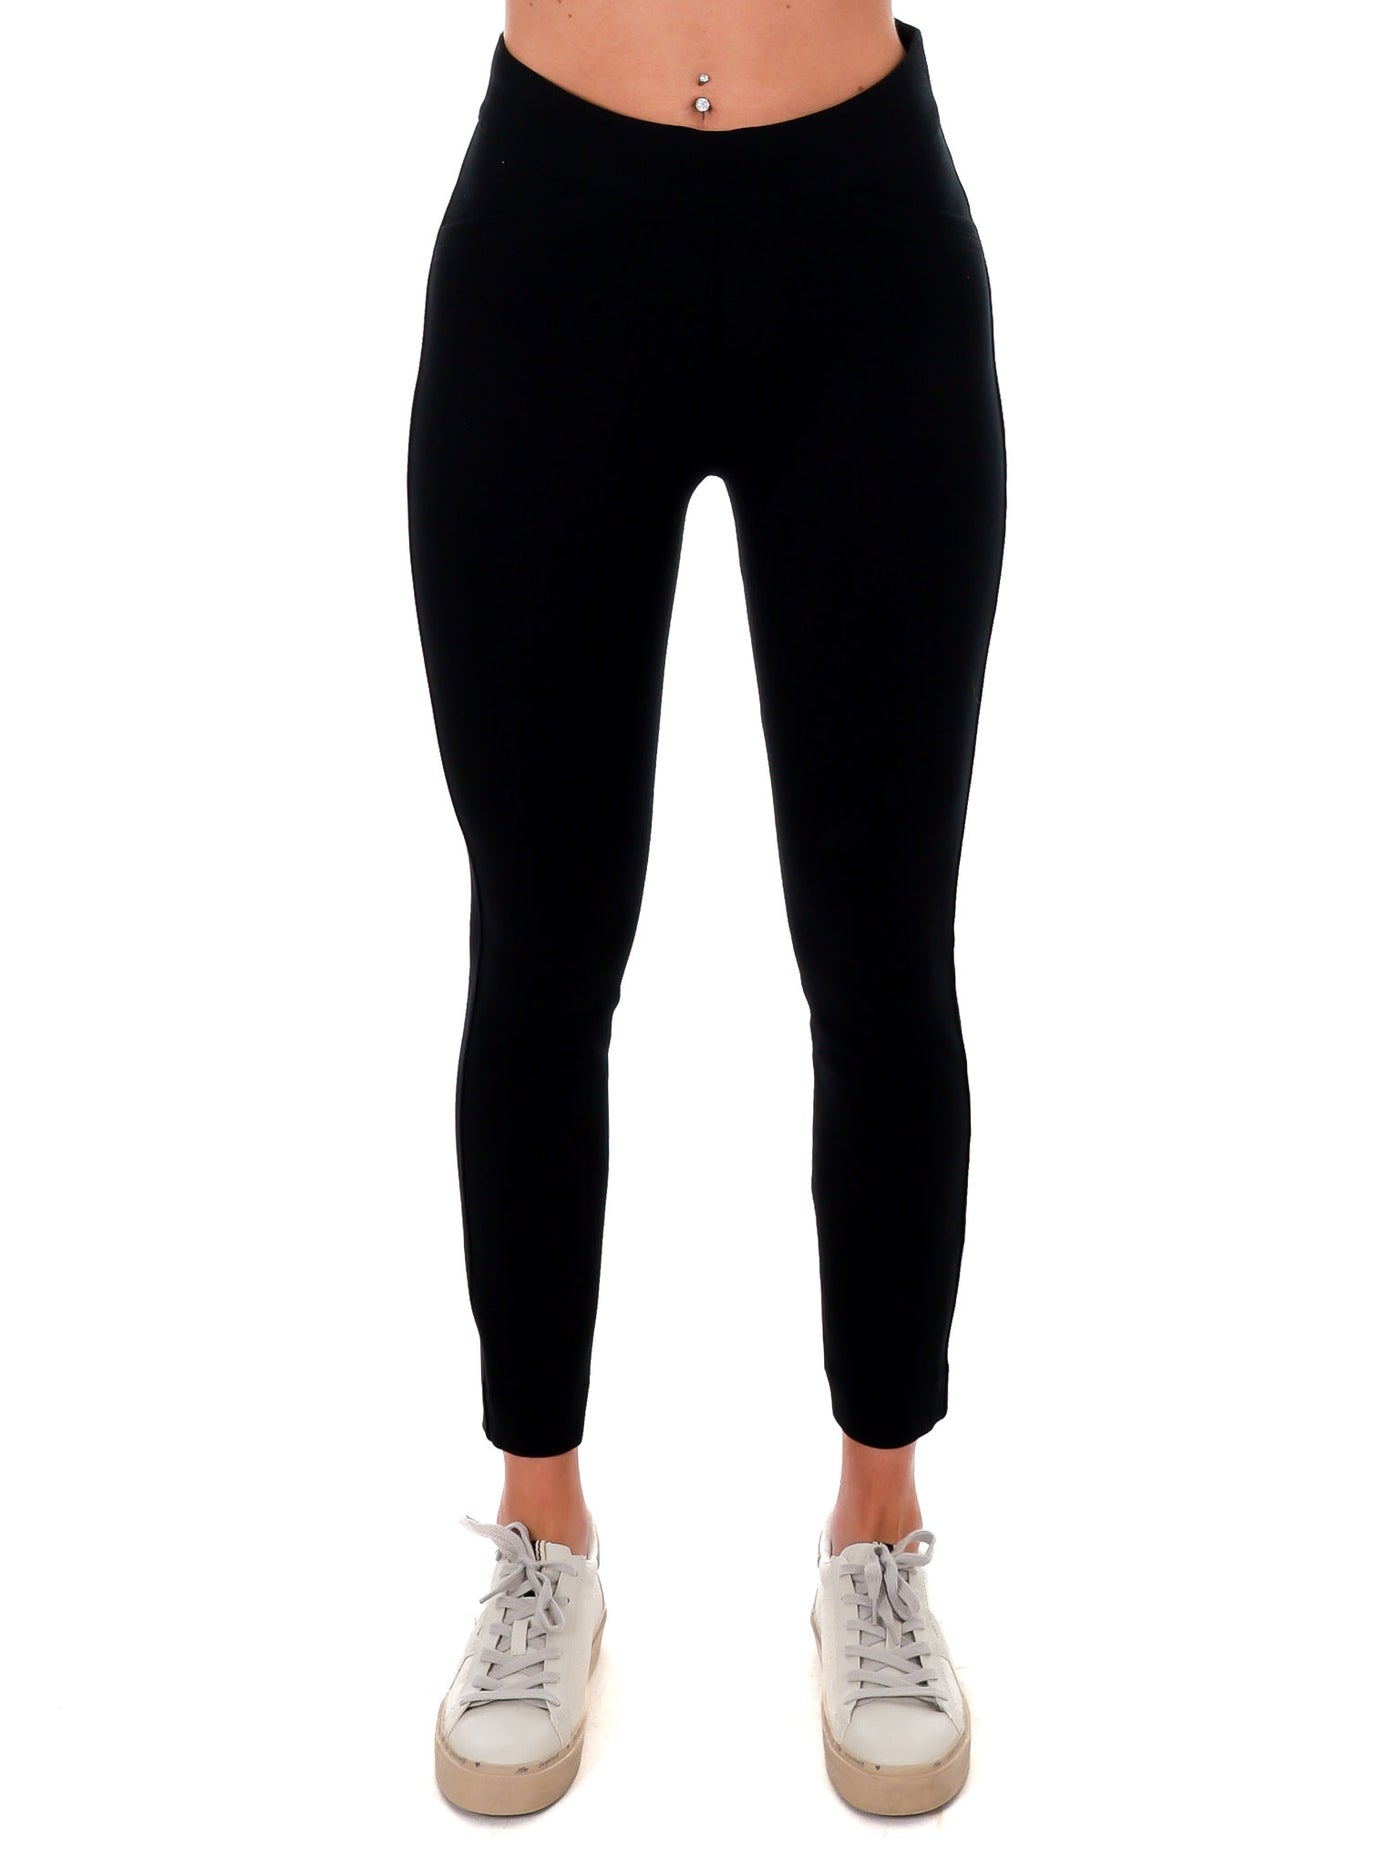 SPANX - NEW! NEW! NEW! The Perfect Black Pant, Straight Leg is your new  go-to for any outfit or occasion. Thanks to—seriously, magical—smoothing  ponte fabric and a comfortable, pull-on design, this style